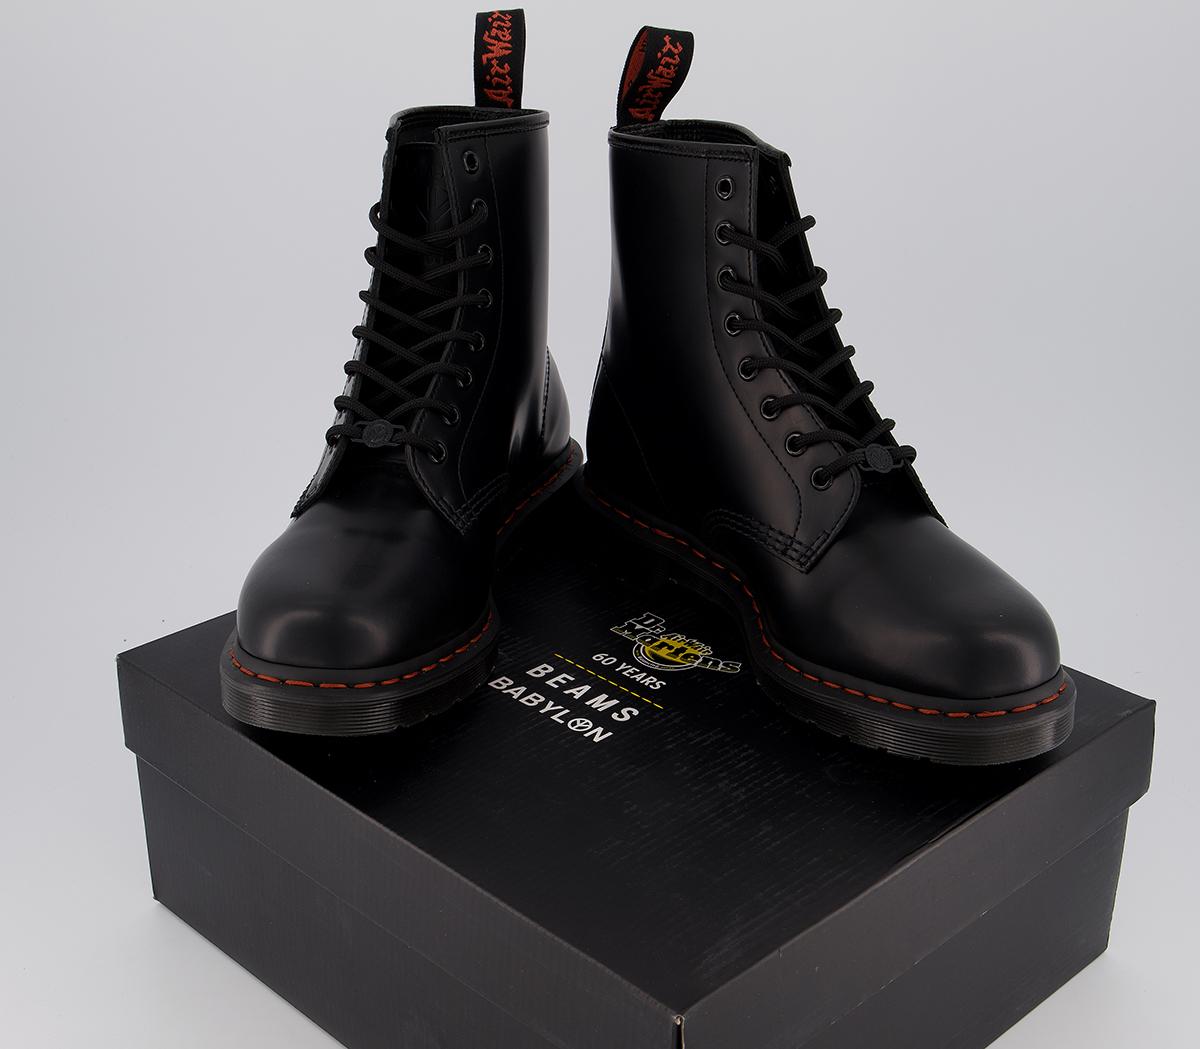 Dr. Martens 1460 Beams X Babylon Boots Black Smooth Leather - Boots